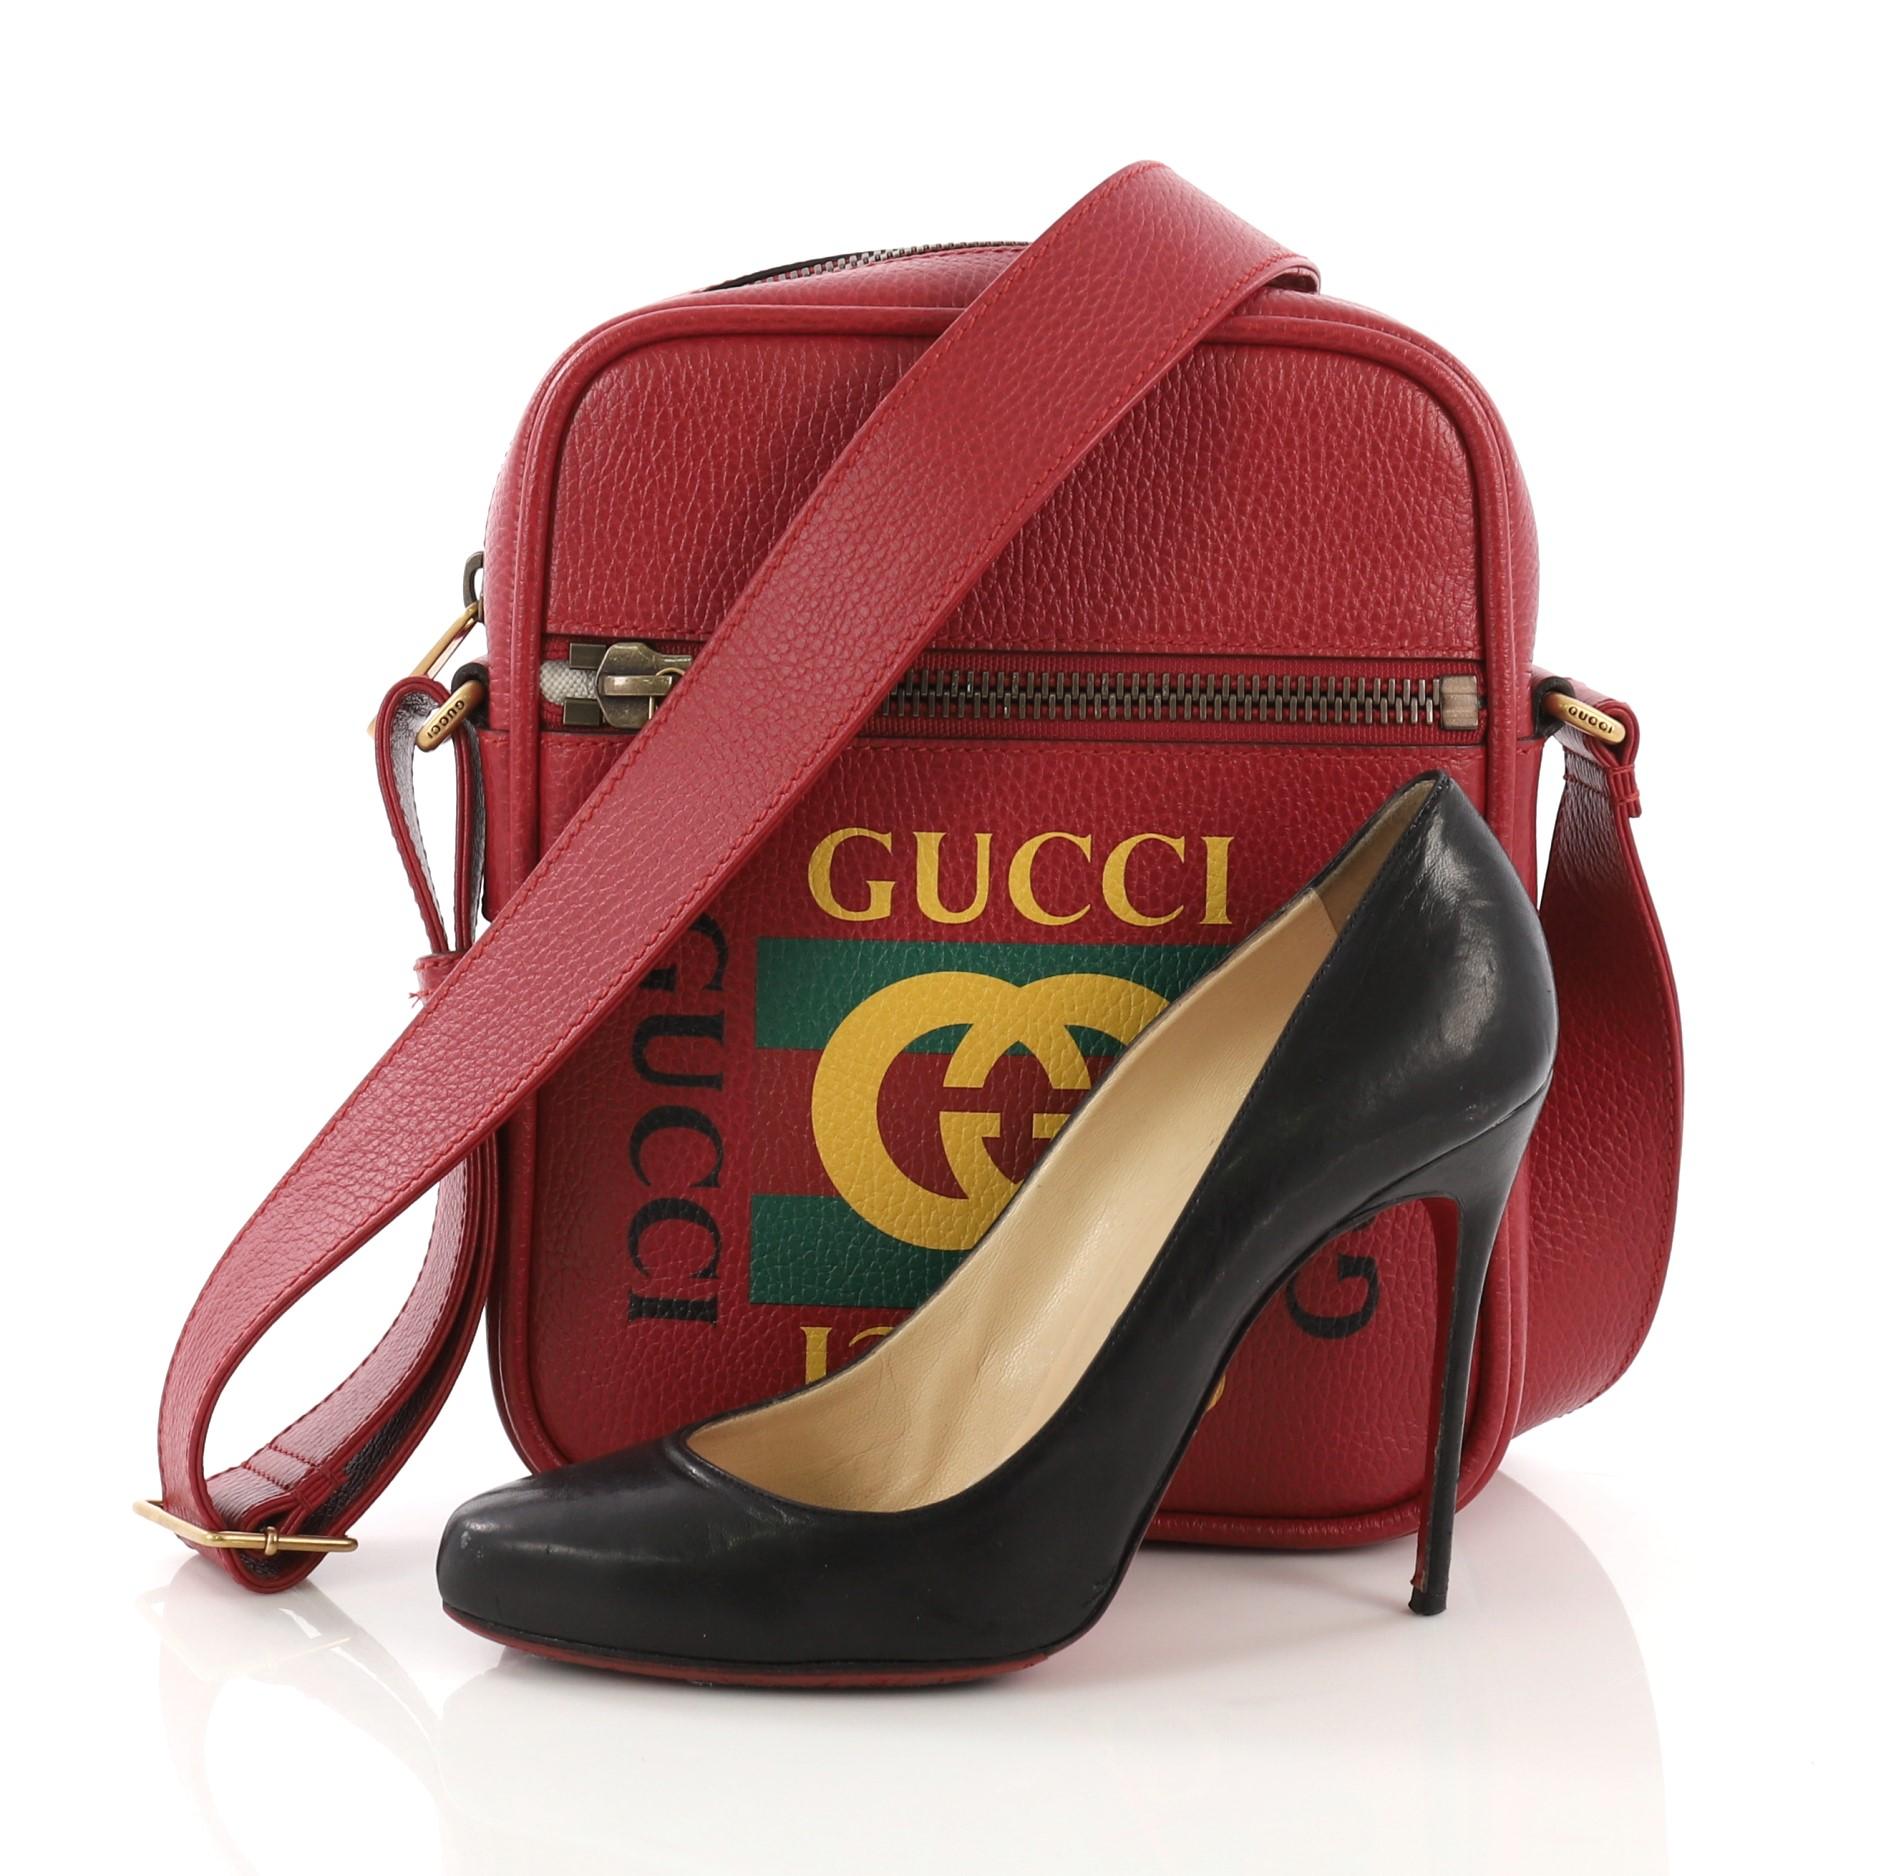 This Gucci Logo Zip Messenger Bag Printed Leather Small, crafted from red printed leather, features adjustable leather strap, front zip pocket, printed Gucci vintage logo, and aged gold-tone hardware. Its top zip closure opens to a beige fabric